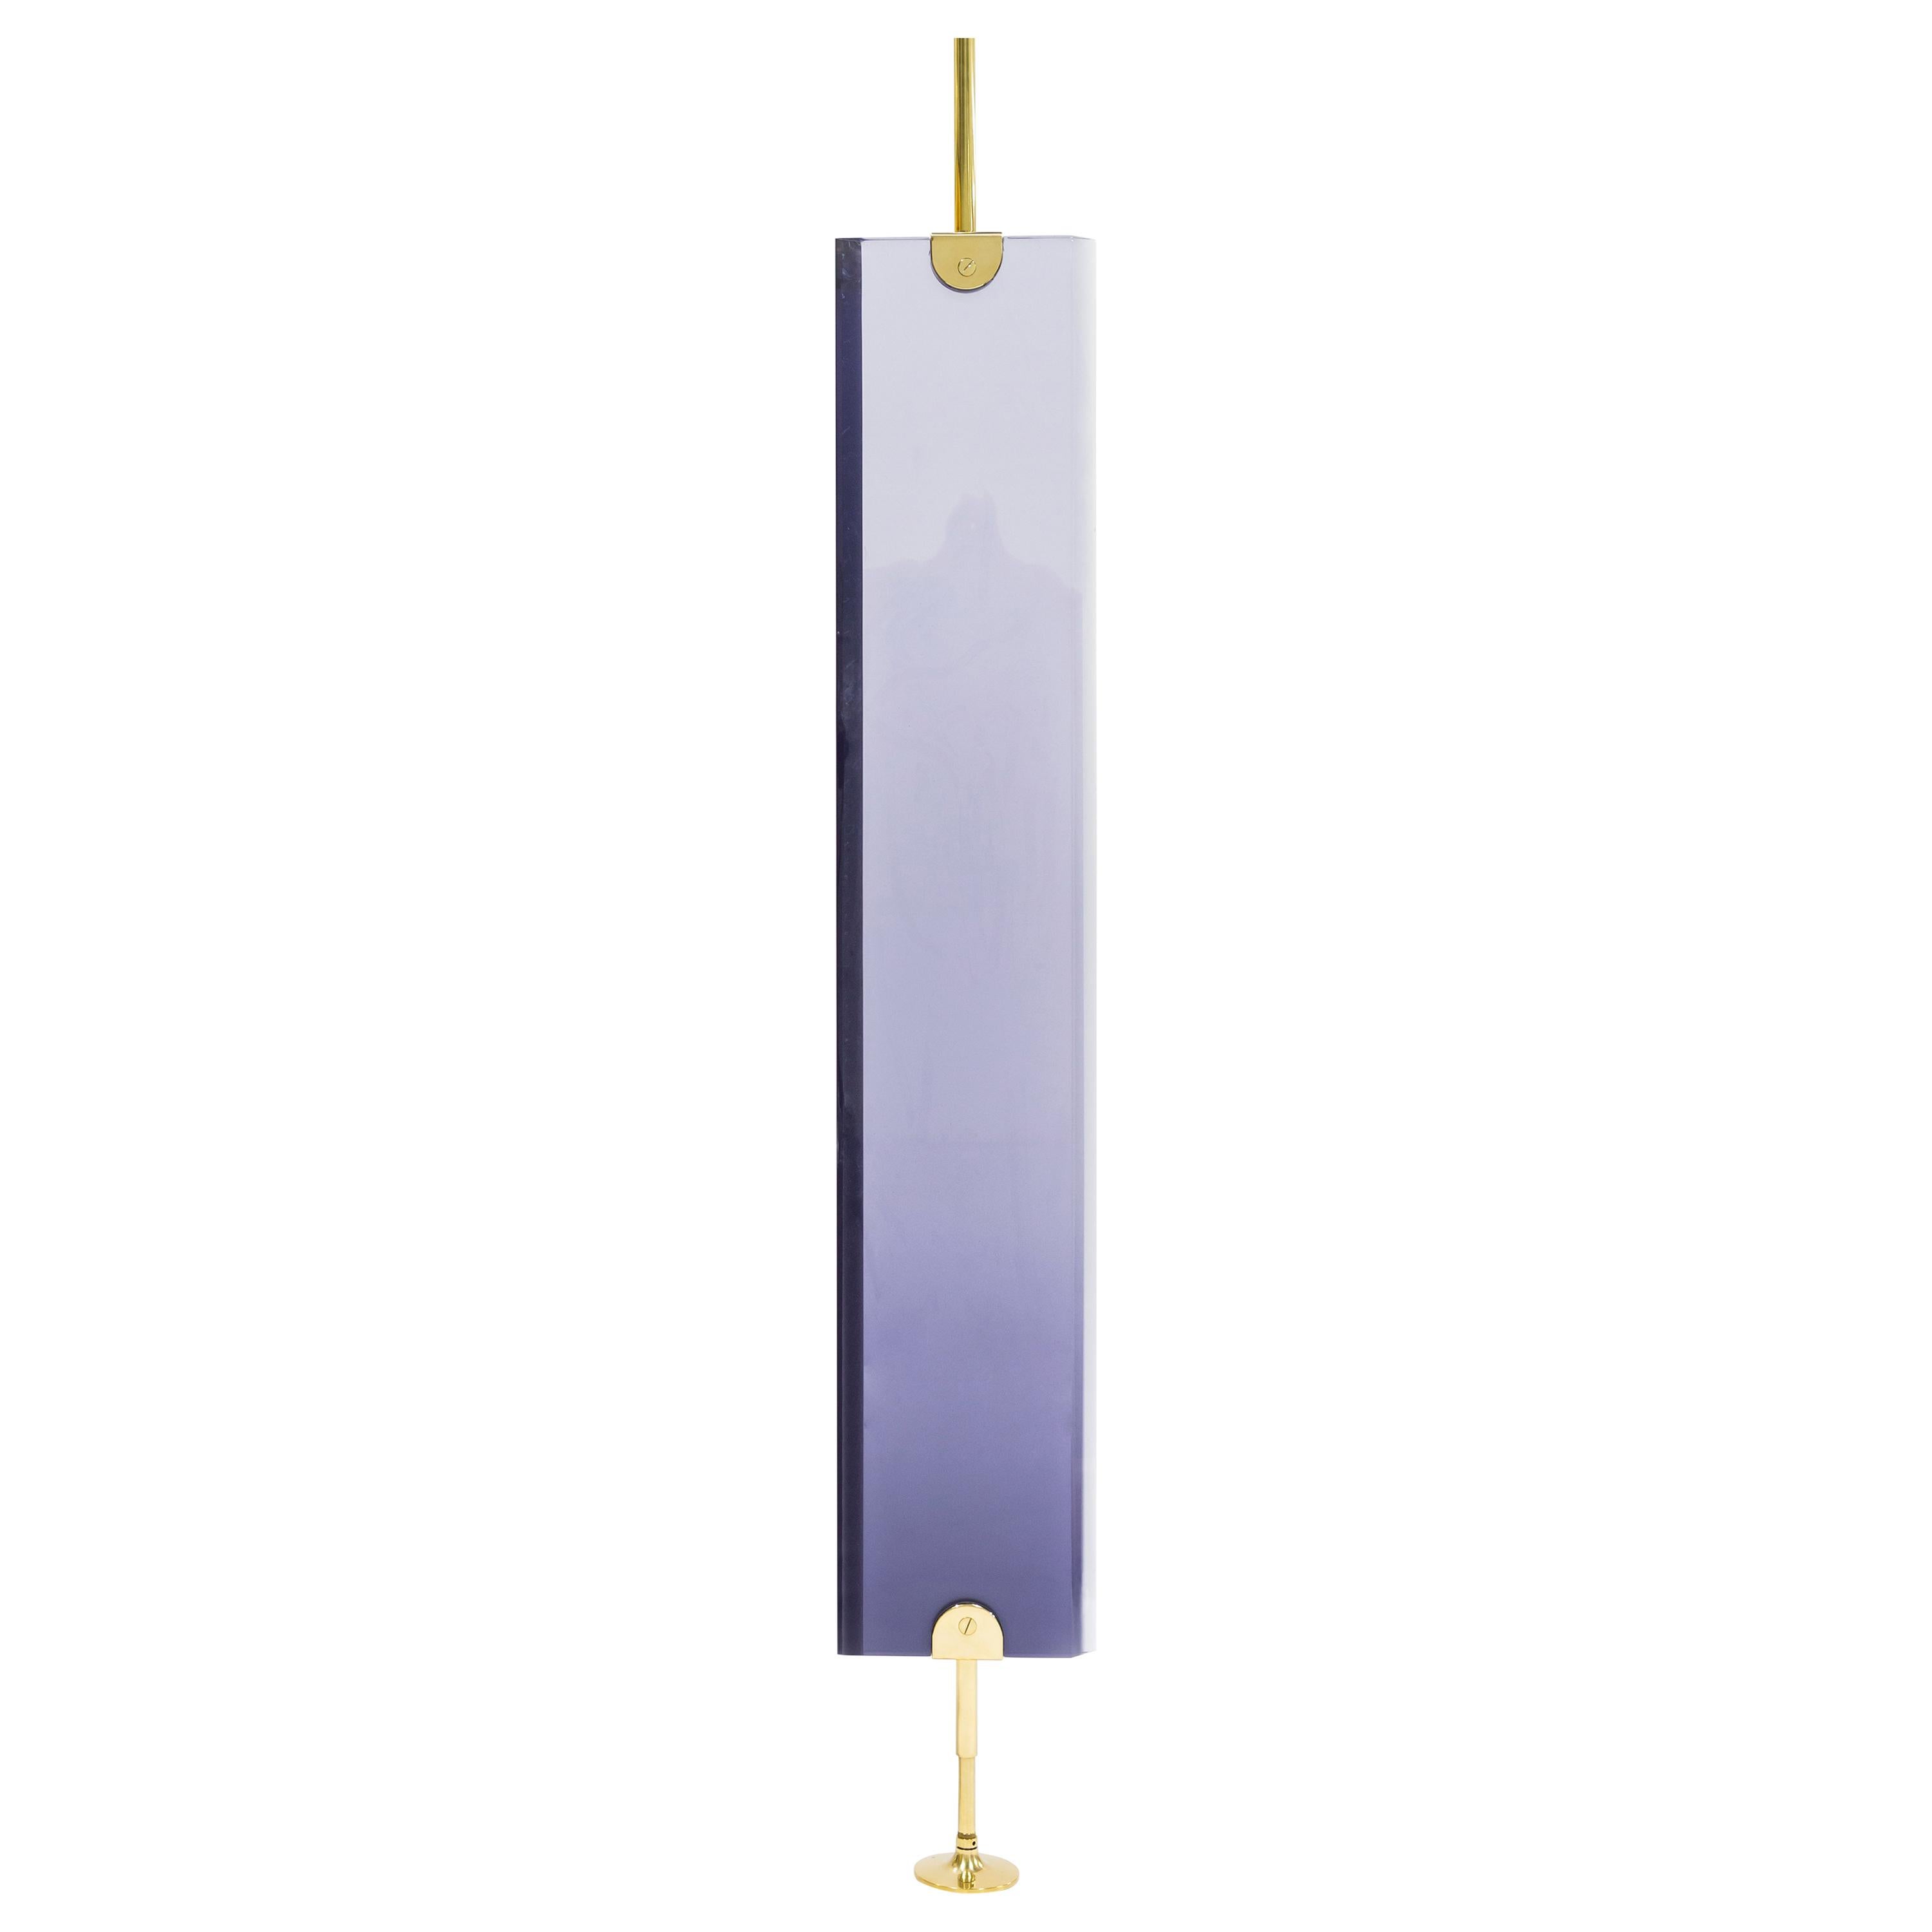 Reverso Separè Light Violet by Draga&Aurel Resin and Brass, 21st Century For Sale